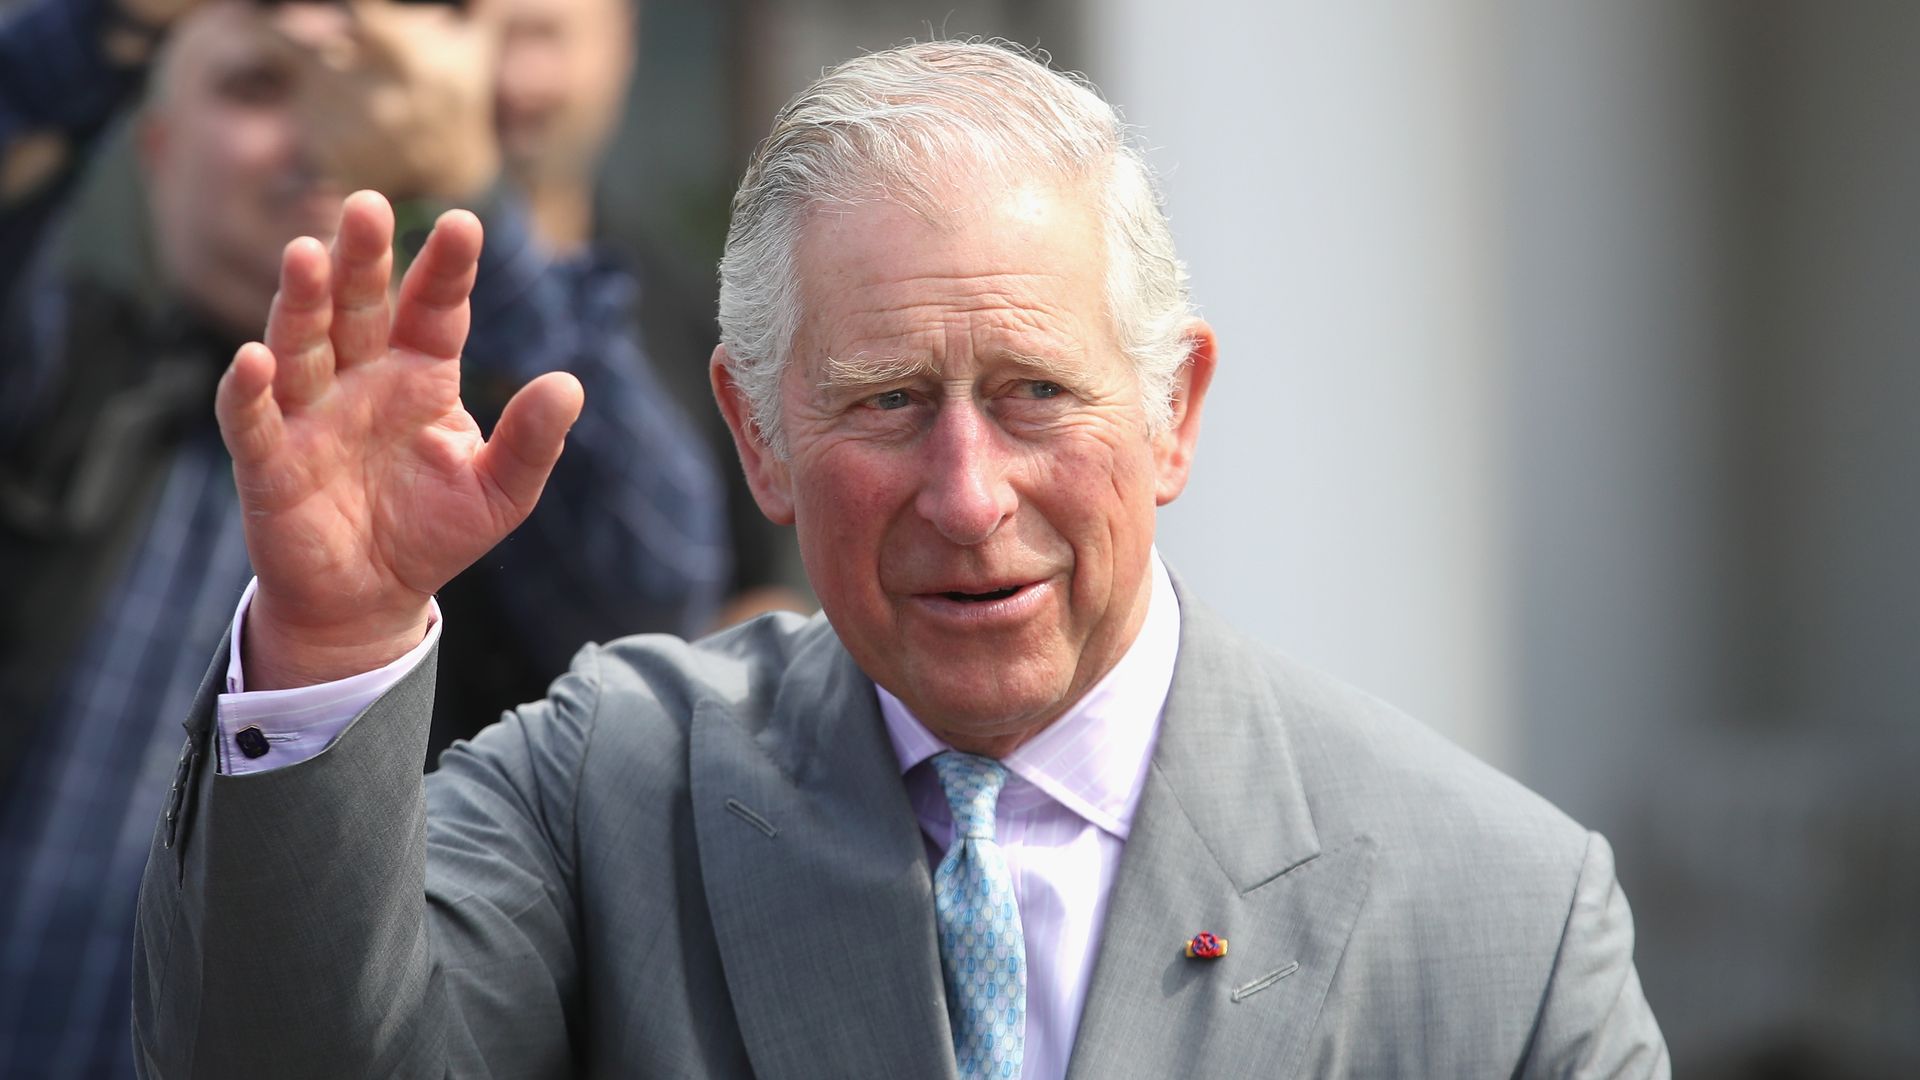 King Charles arrives in Romania ahead of Prince Harry's imminent visit to the UK